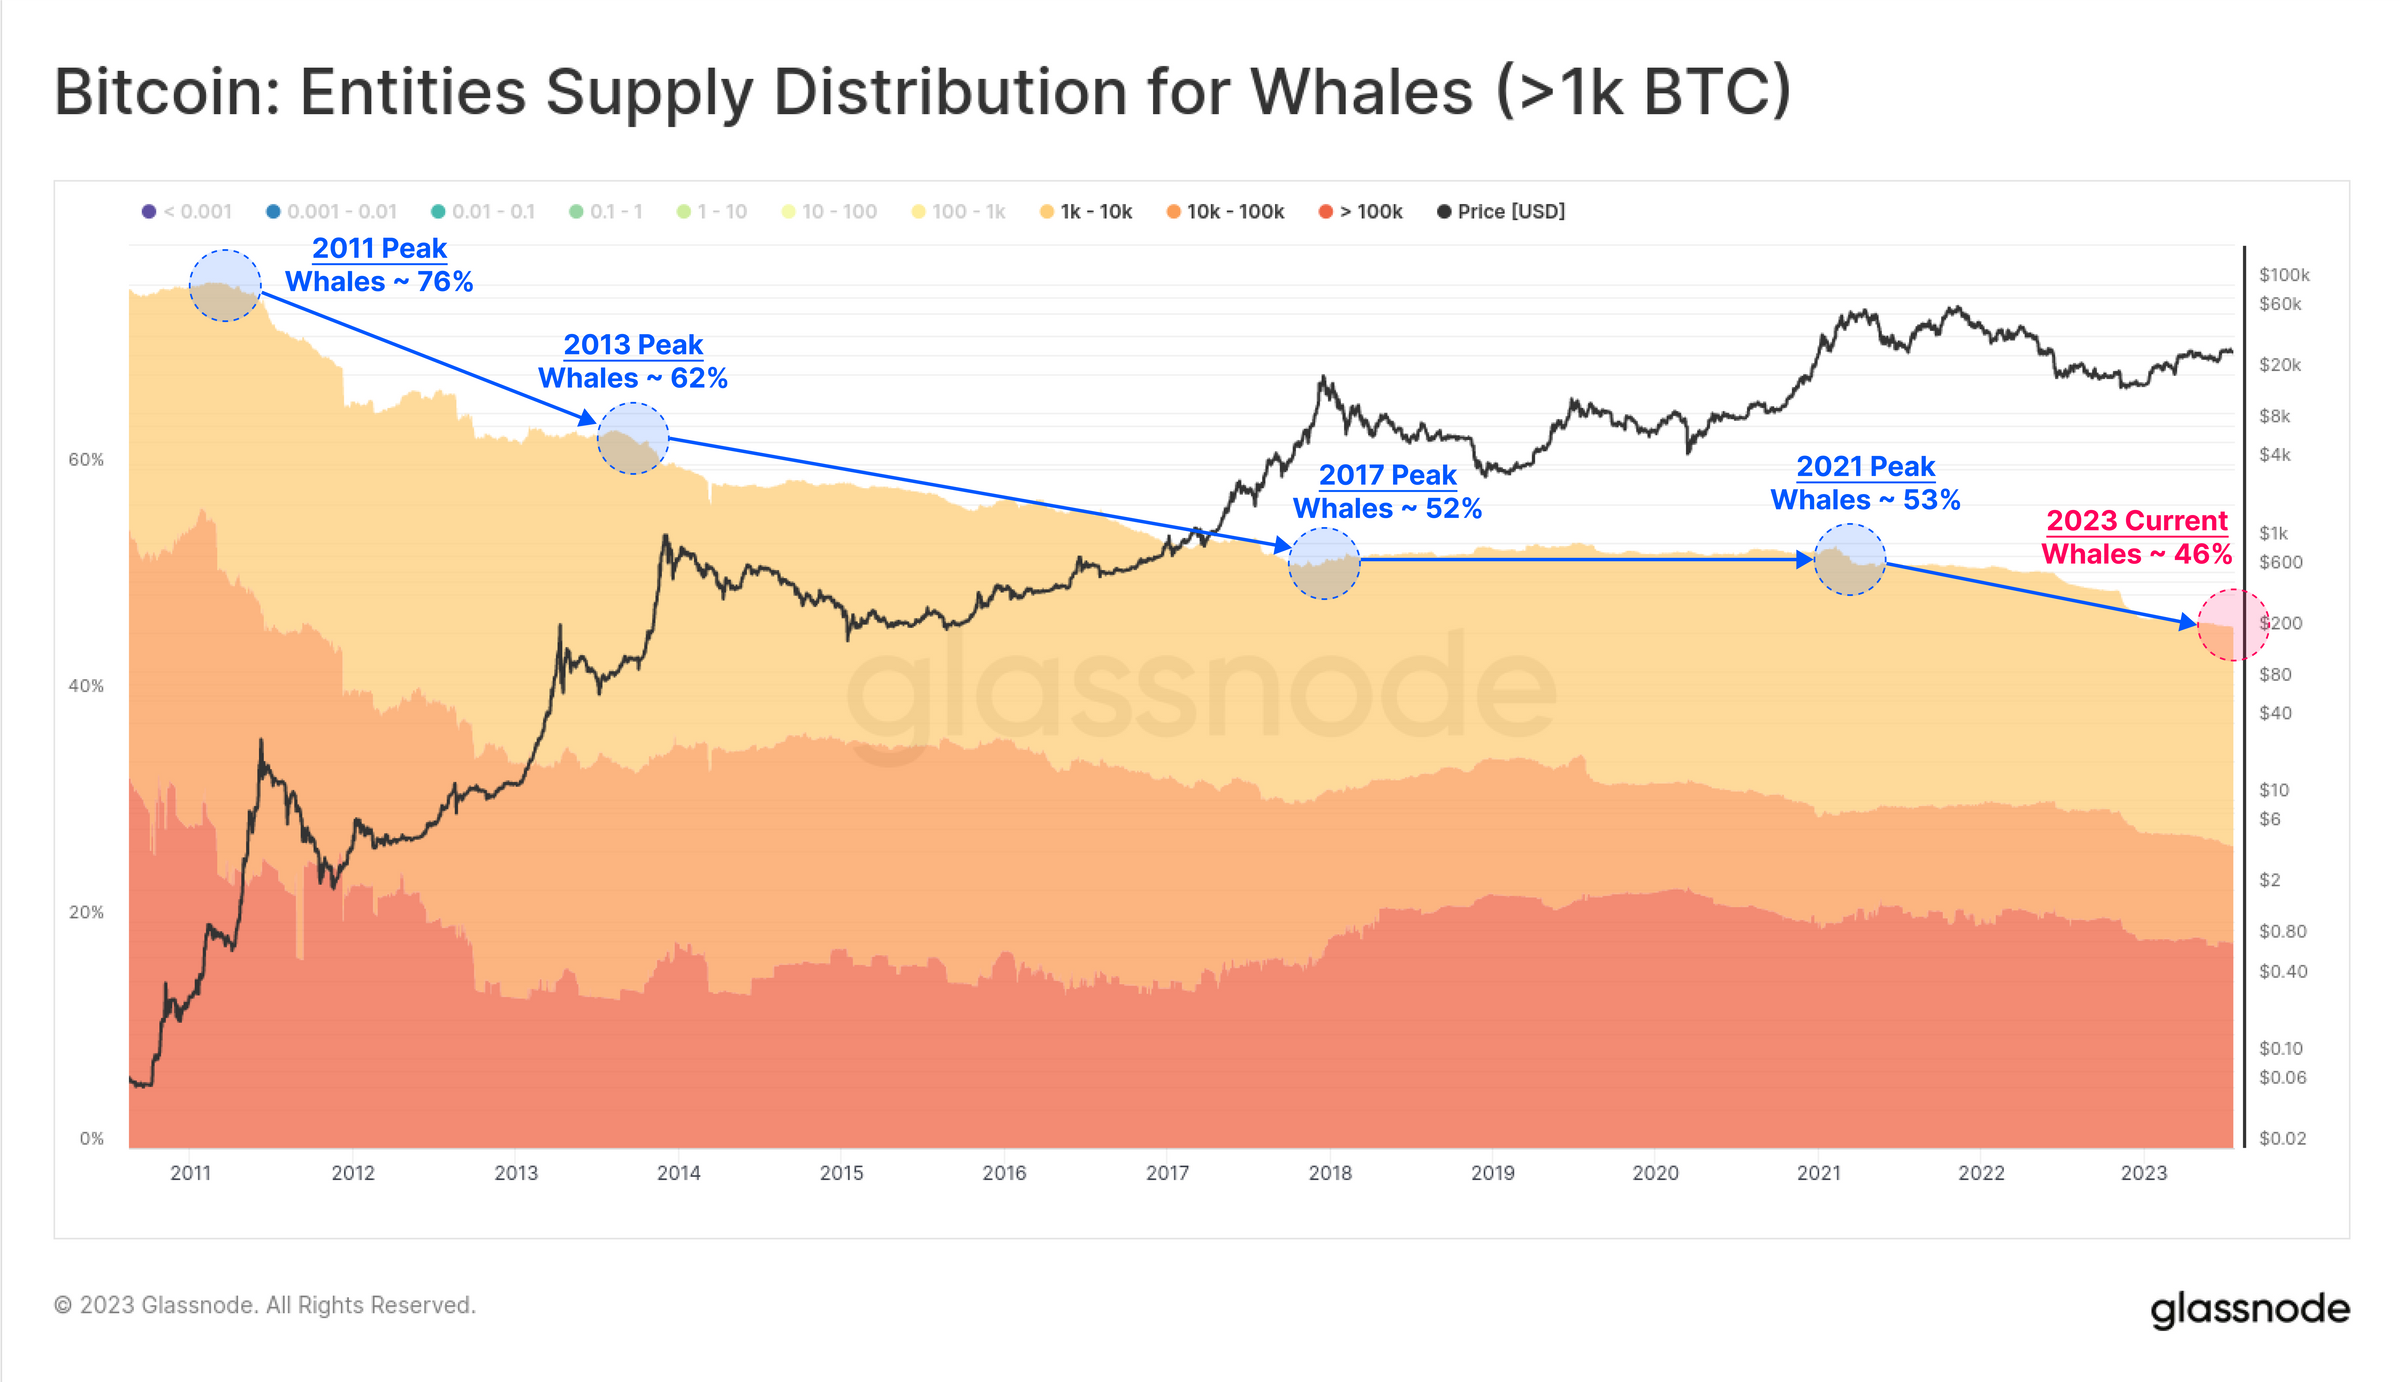 Bitcoin Whale entities accounting for 46%